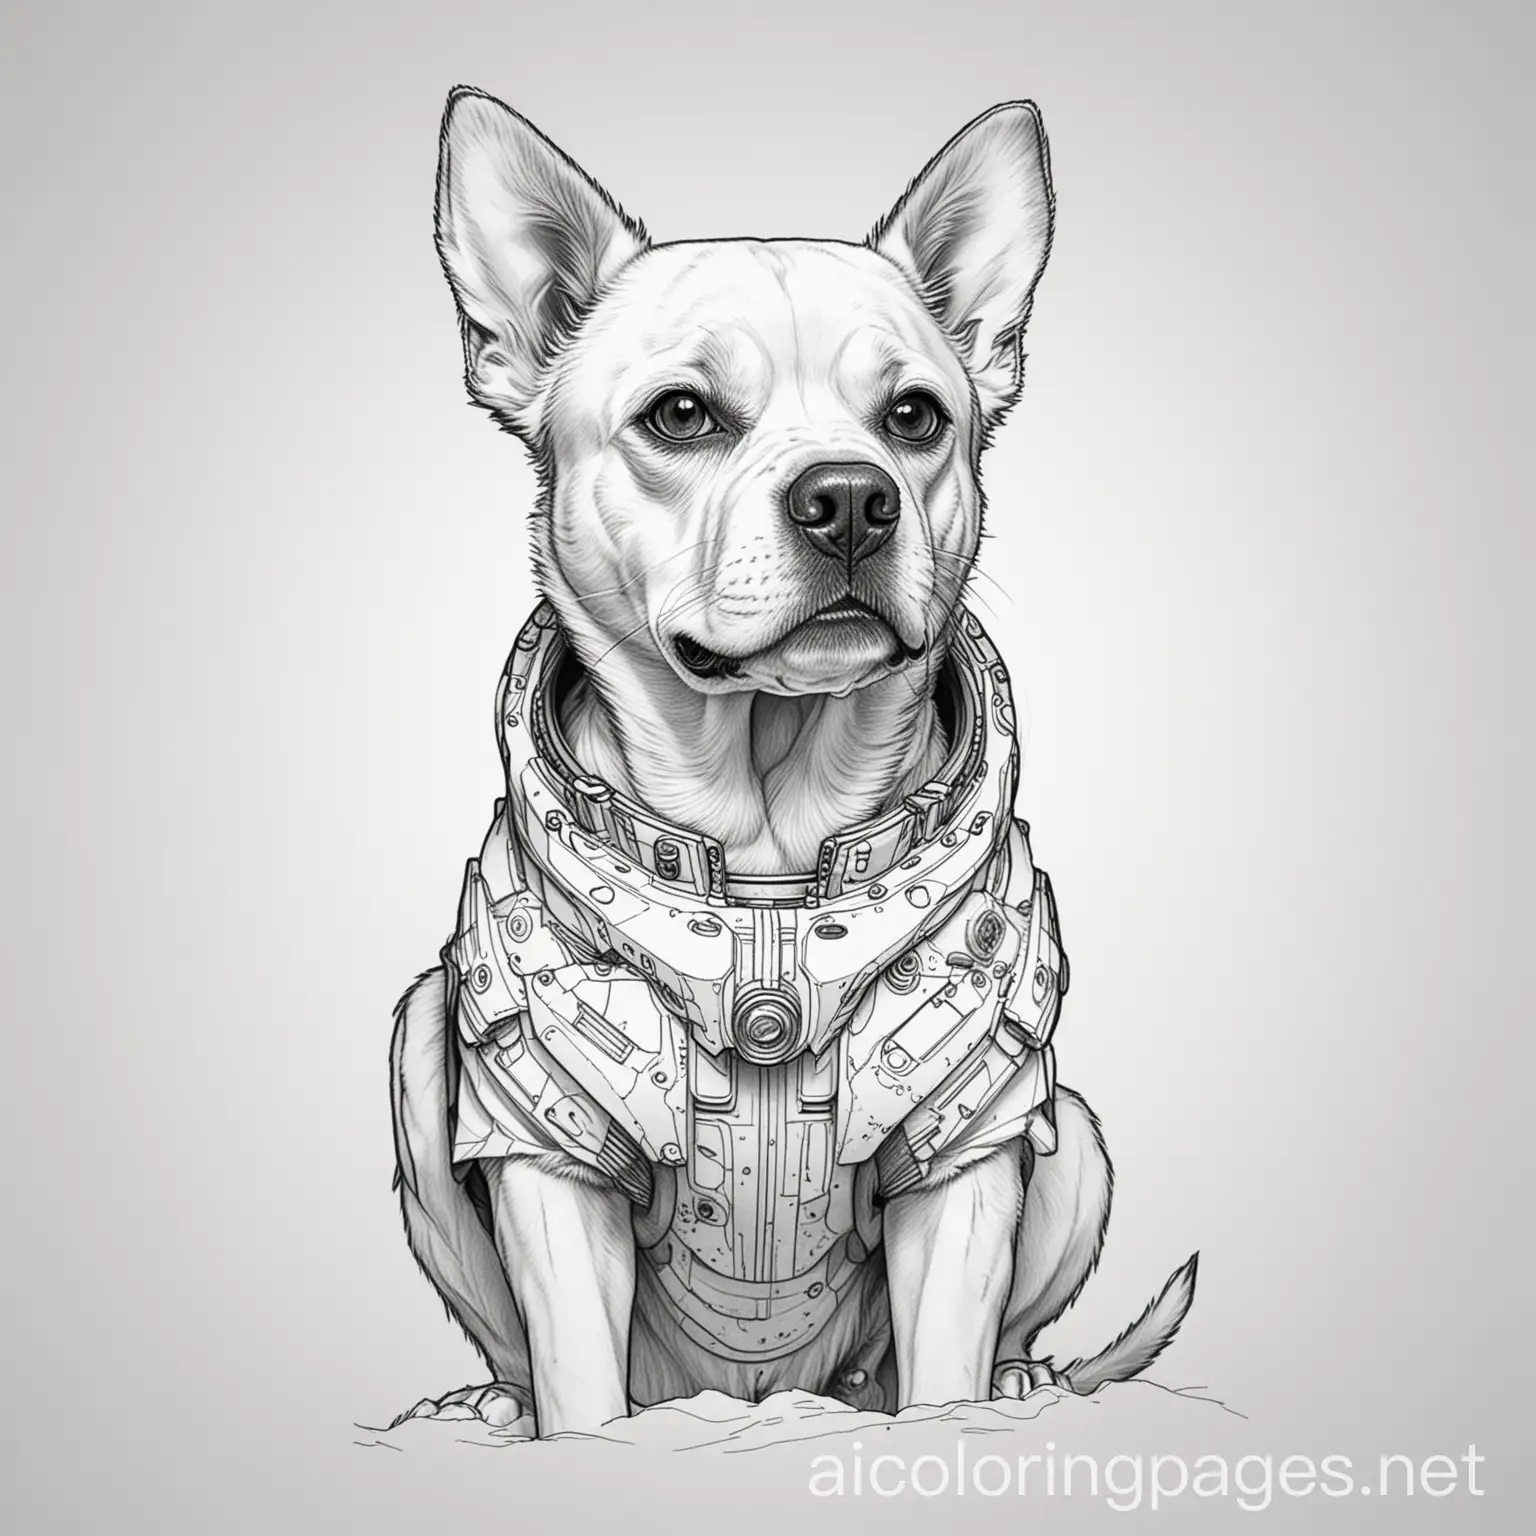 Space-Dog-Coloring-Page-with-Simplicity-and-Ample-White-Space